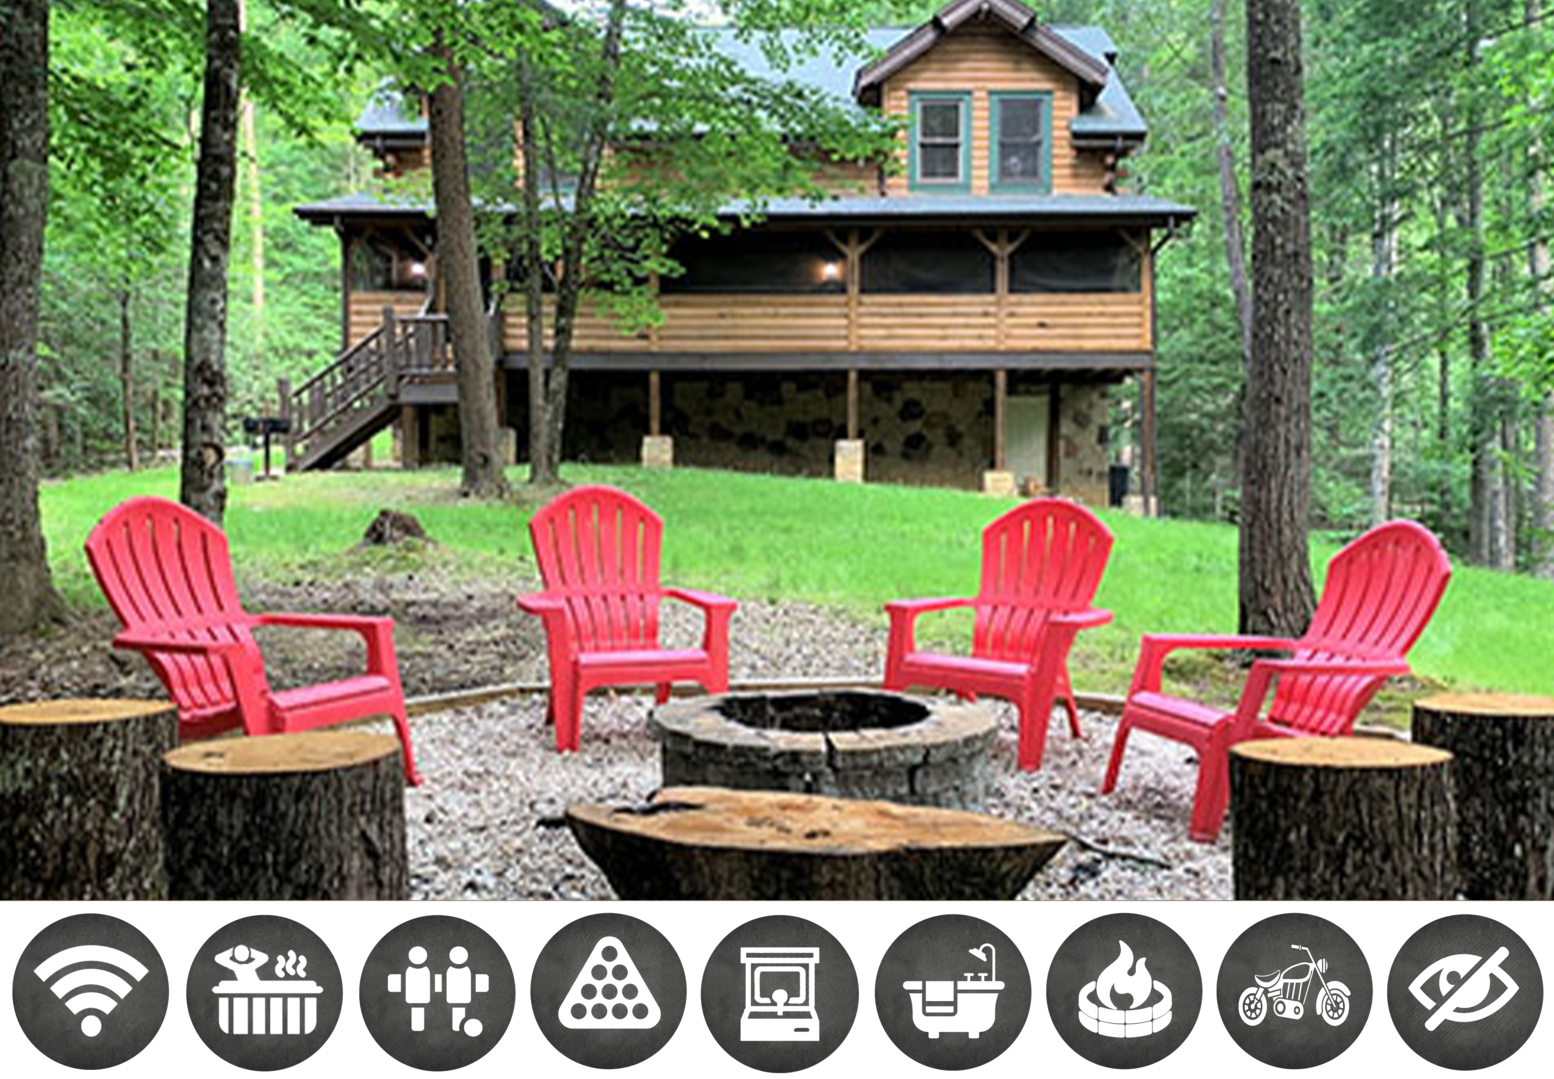 Pigeon Forge rental cabin in the Smokey Mountains - A Mountain Spirit